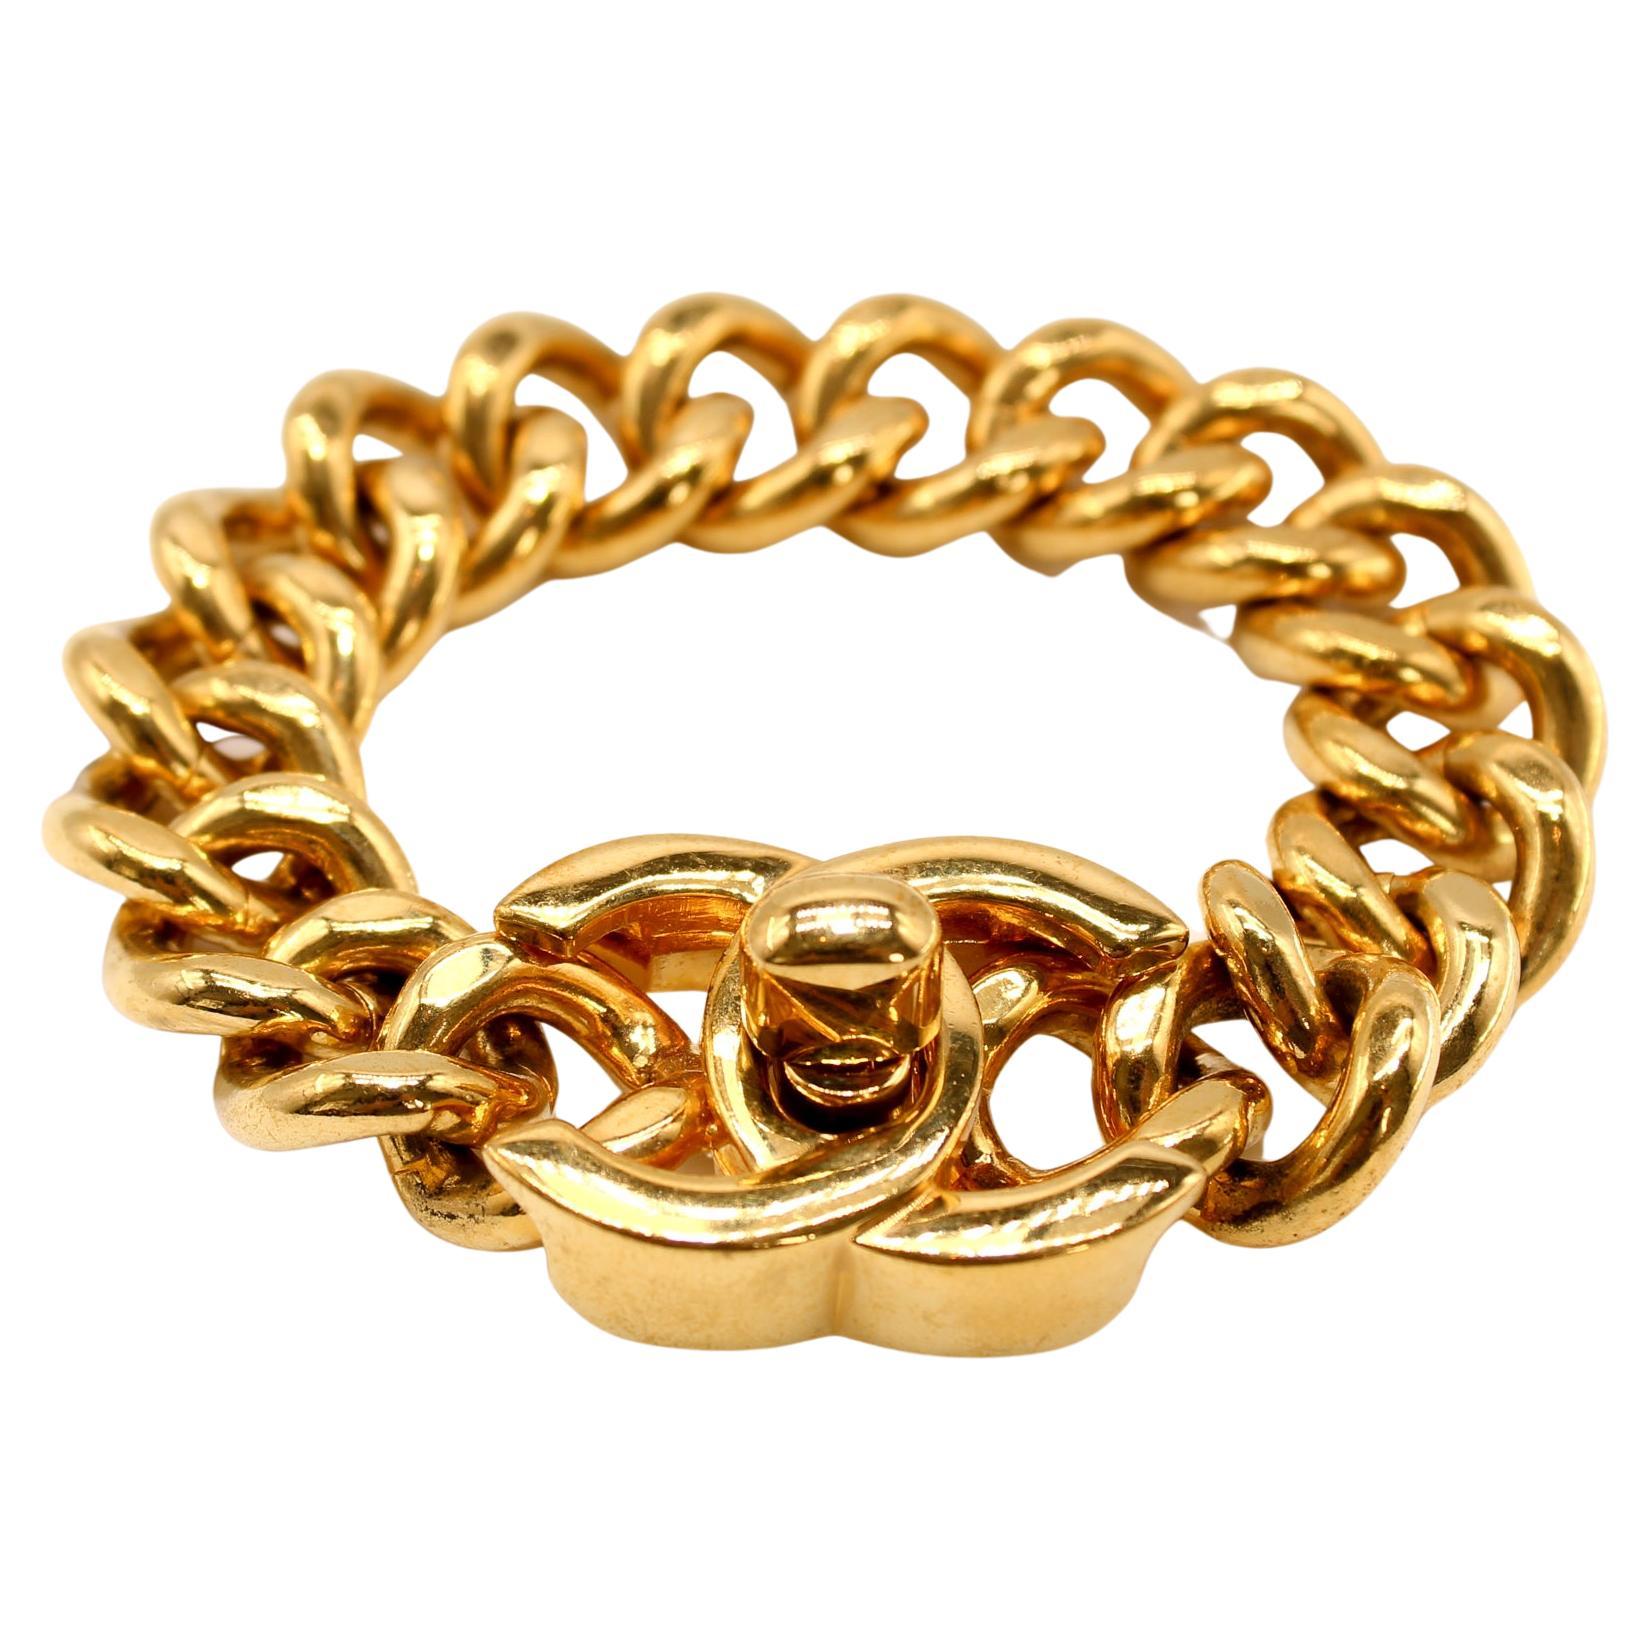 Chanel - Authenticated Bracelet - Metal Gold for Women, Never Worn